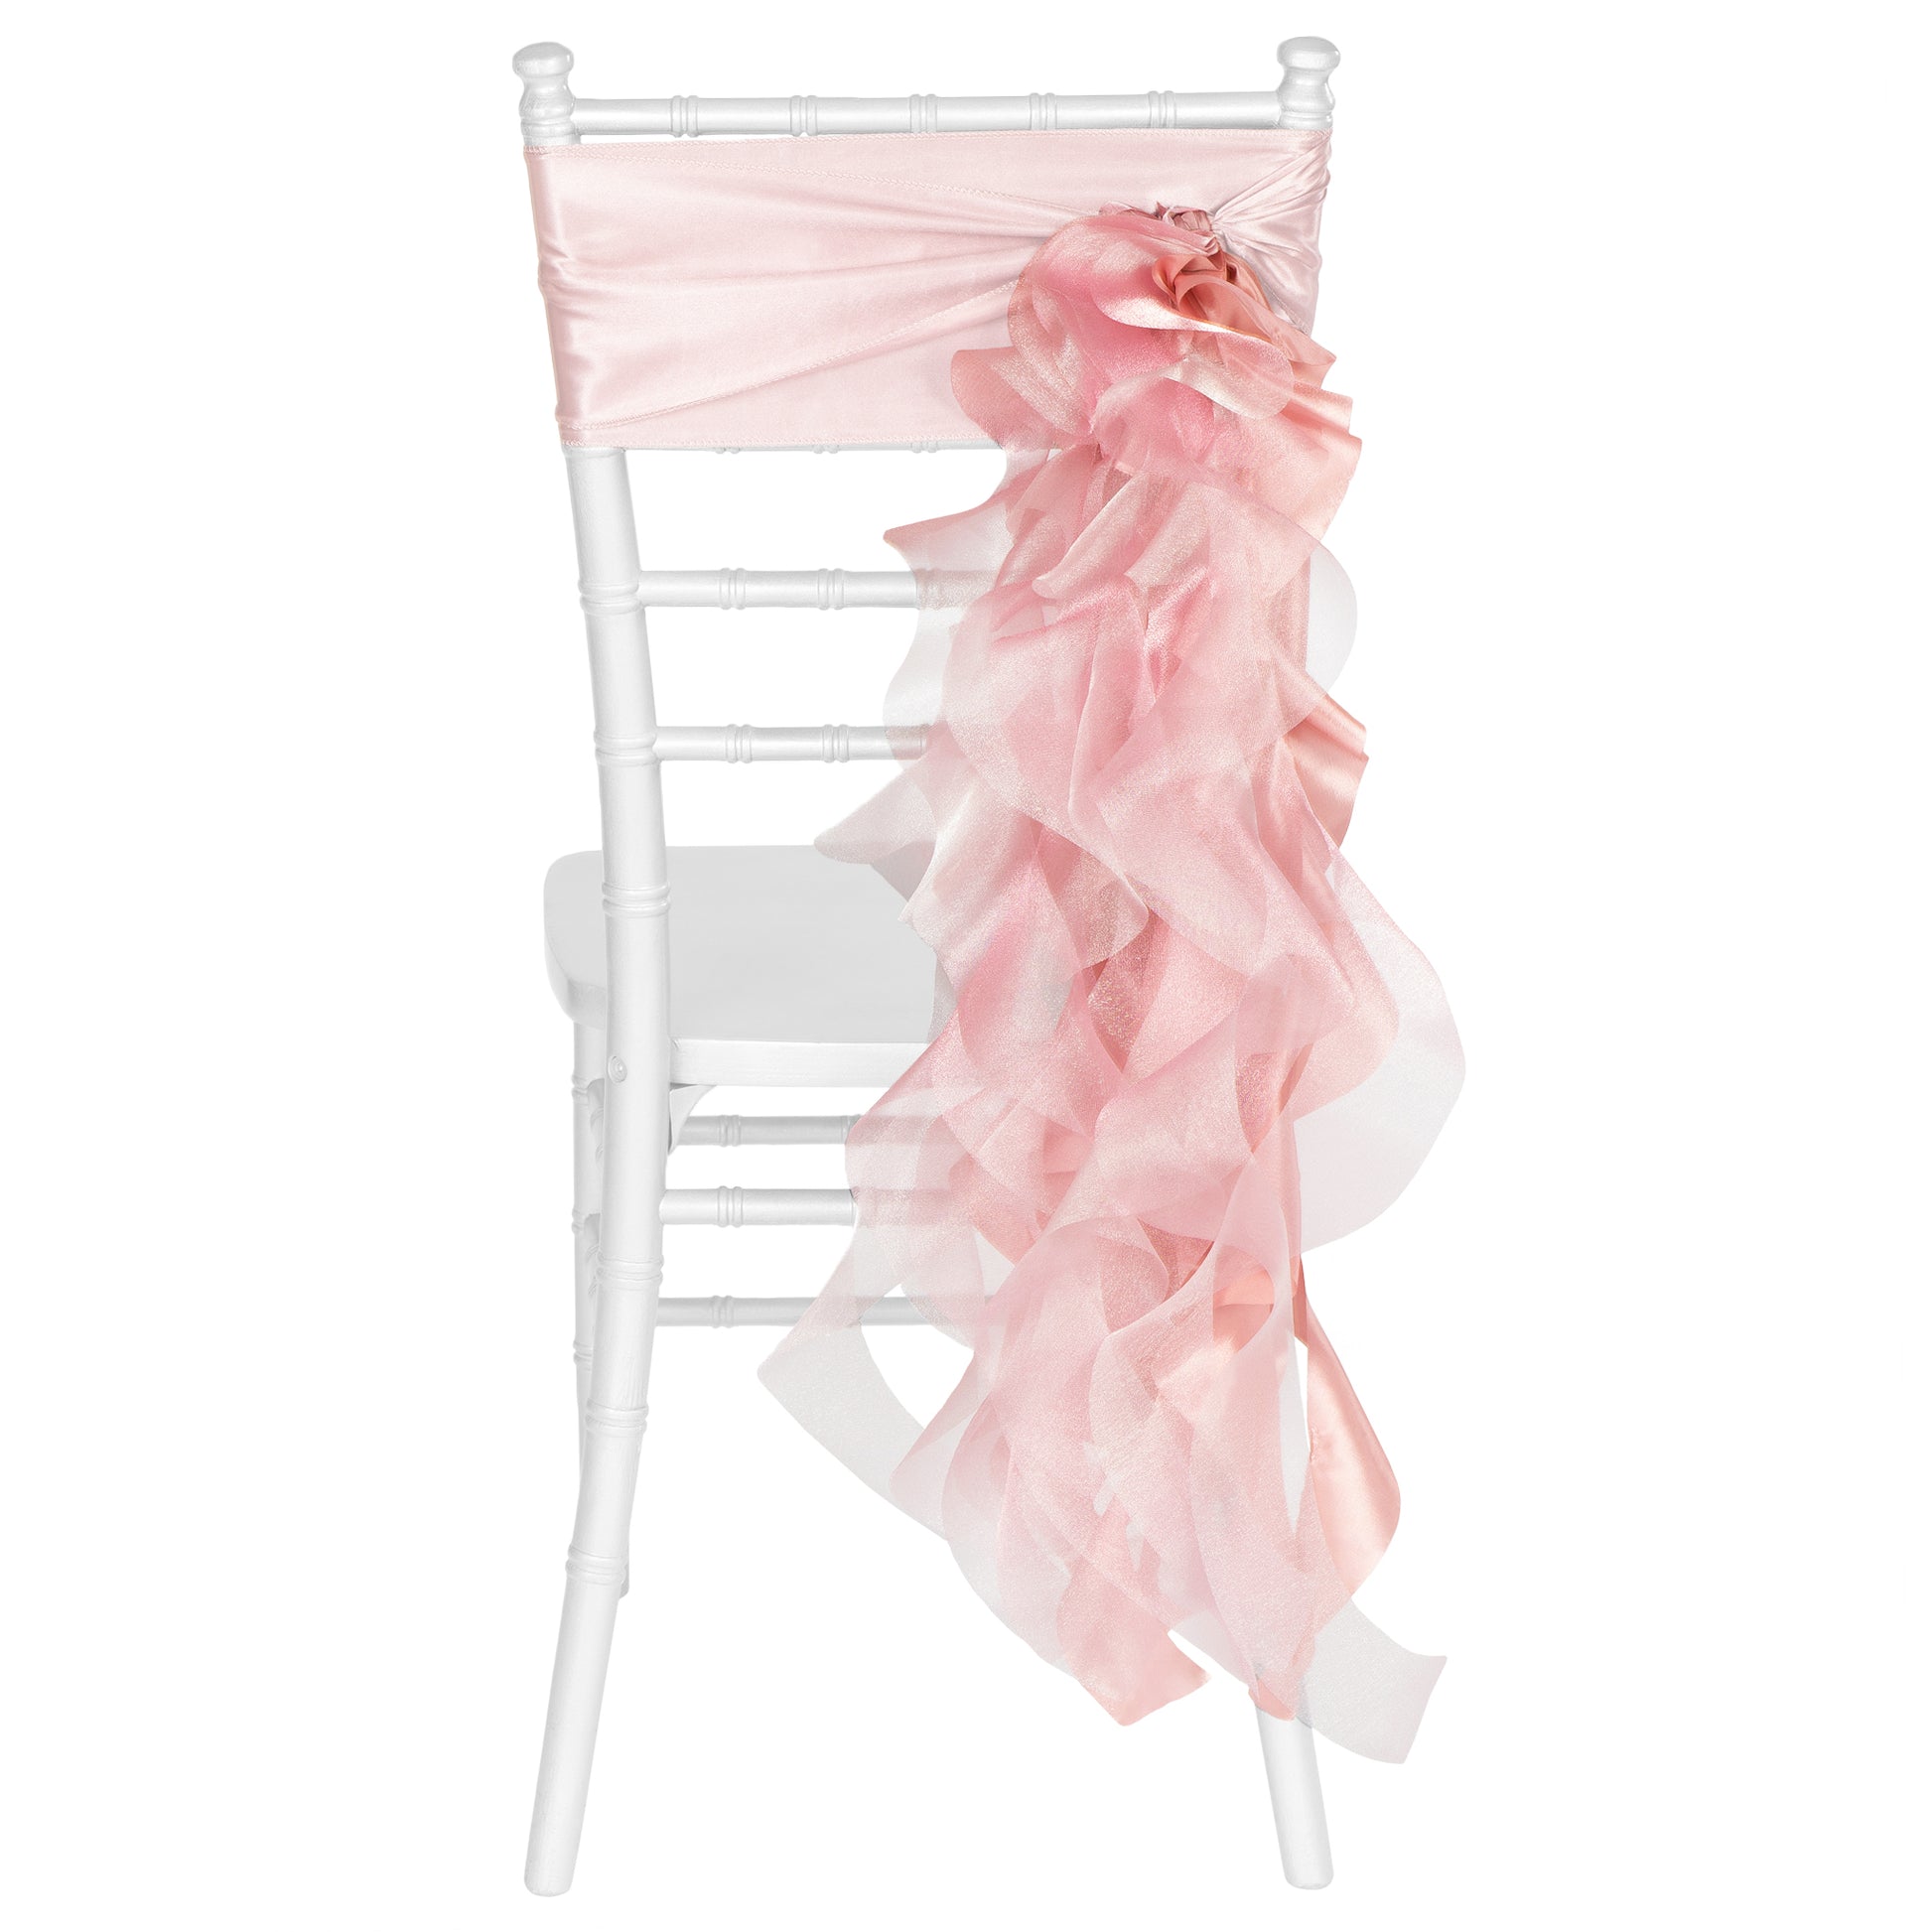 Curly Willow Chair Sash - Dusty Rose/Mauve - CV Linens